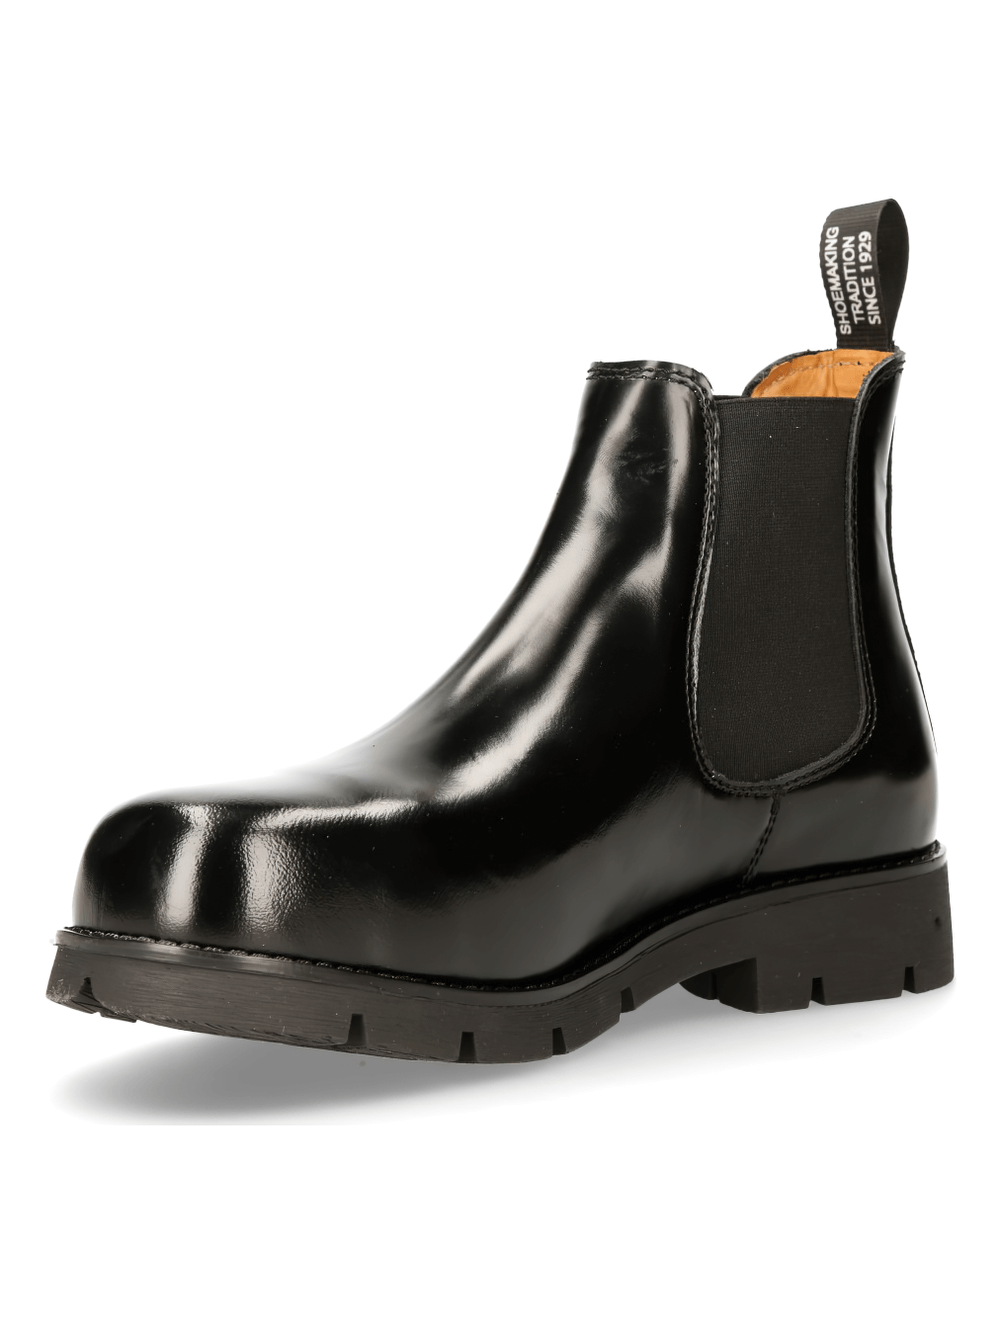 NEW ROCK Sleek Black Military Ankle Boots With Steel Toes